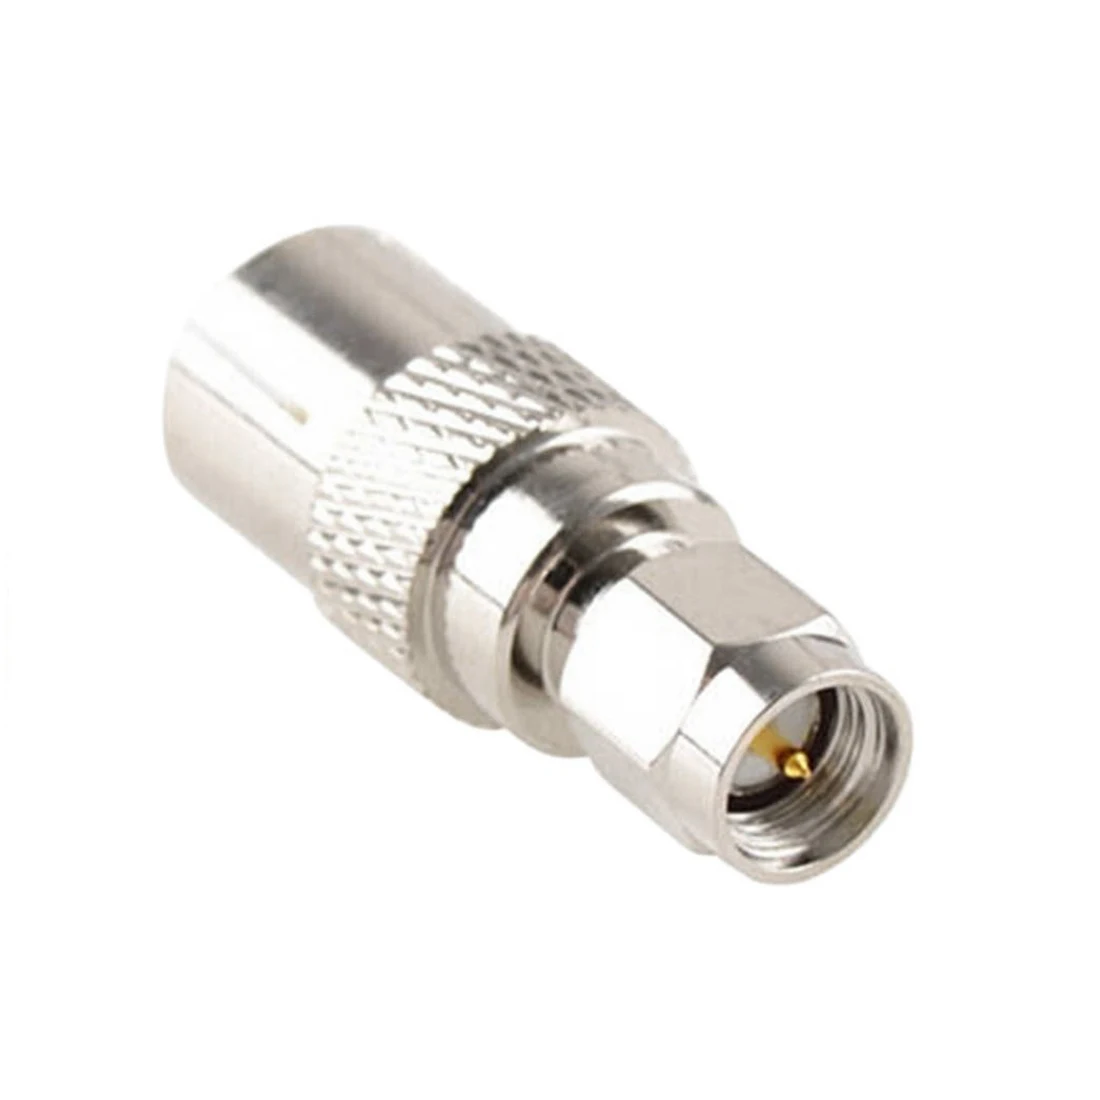 1pc Adapter IEC PAL DVB-T TV Female Jack to SMA Plug Male Connector Convertor Straight Nickel Plating